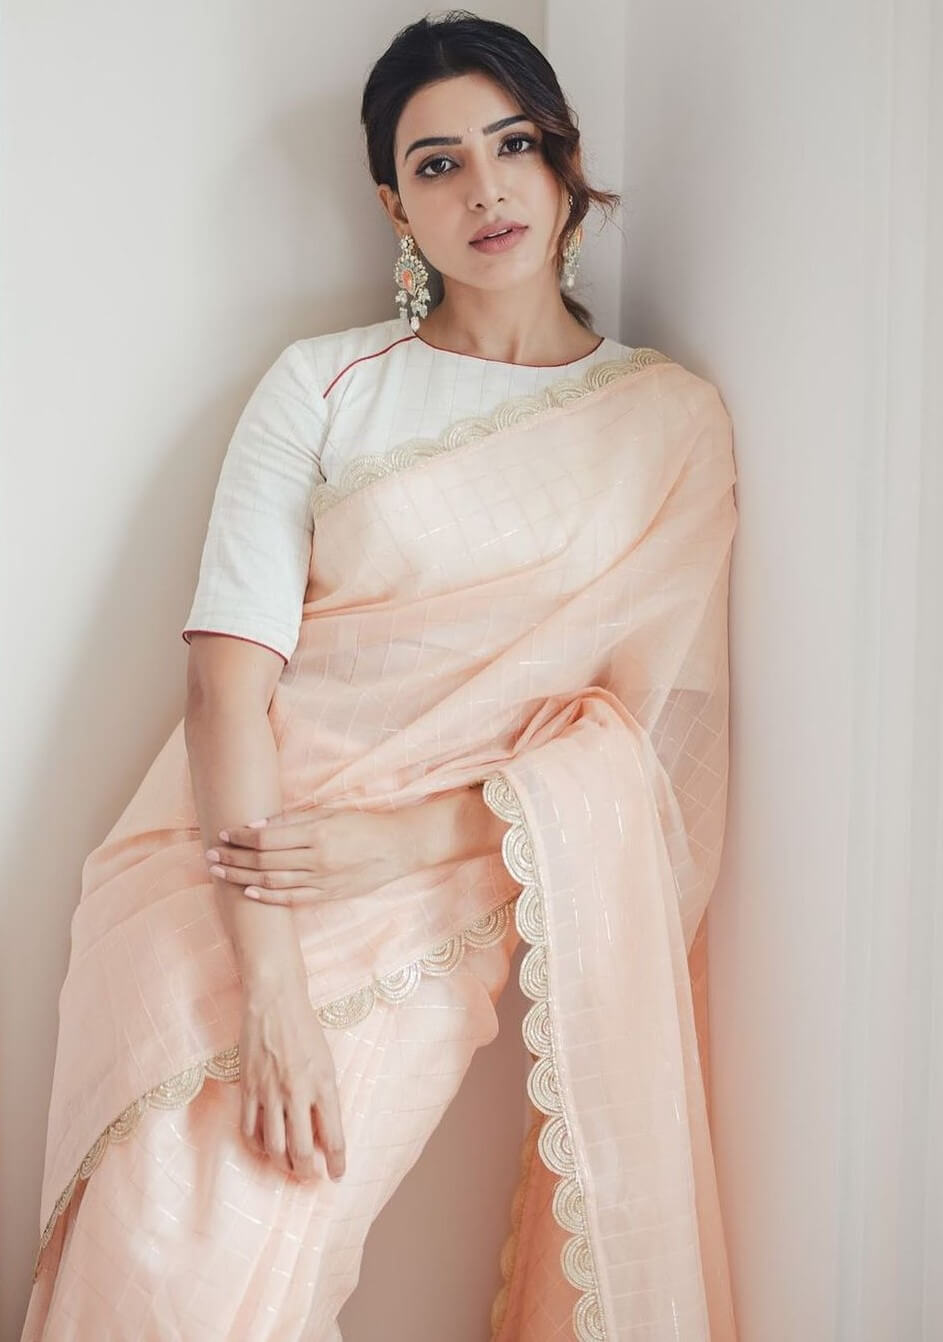 Pushpa: The Rise Movie Actress In Peach Color Saree With Half Samantha Saree DesignsSleeve Blouse